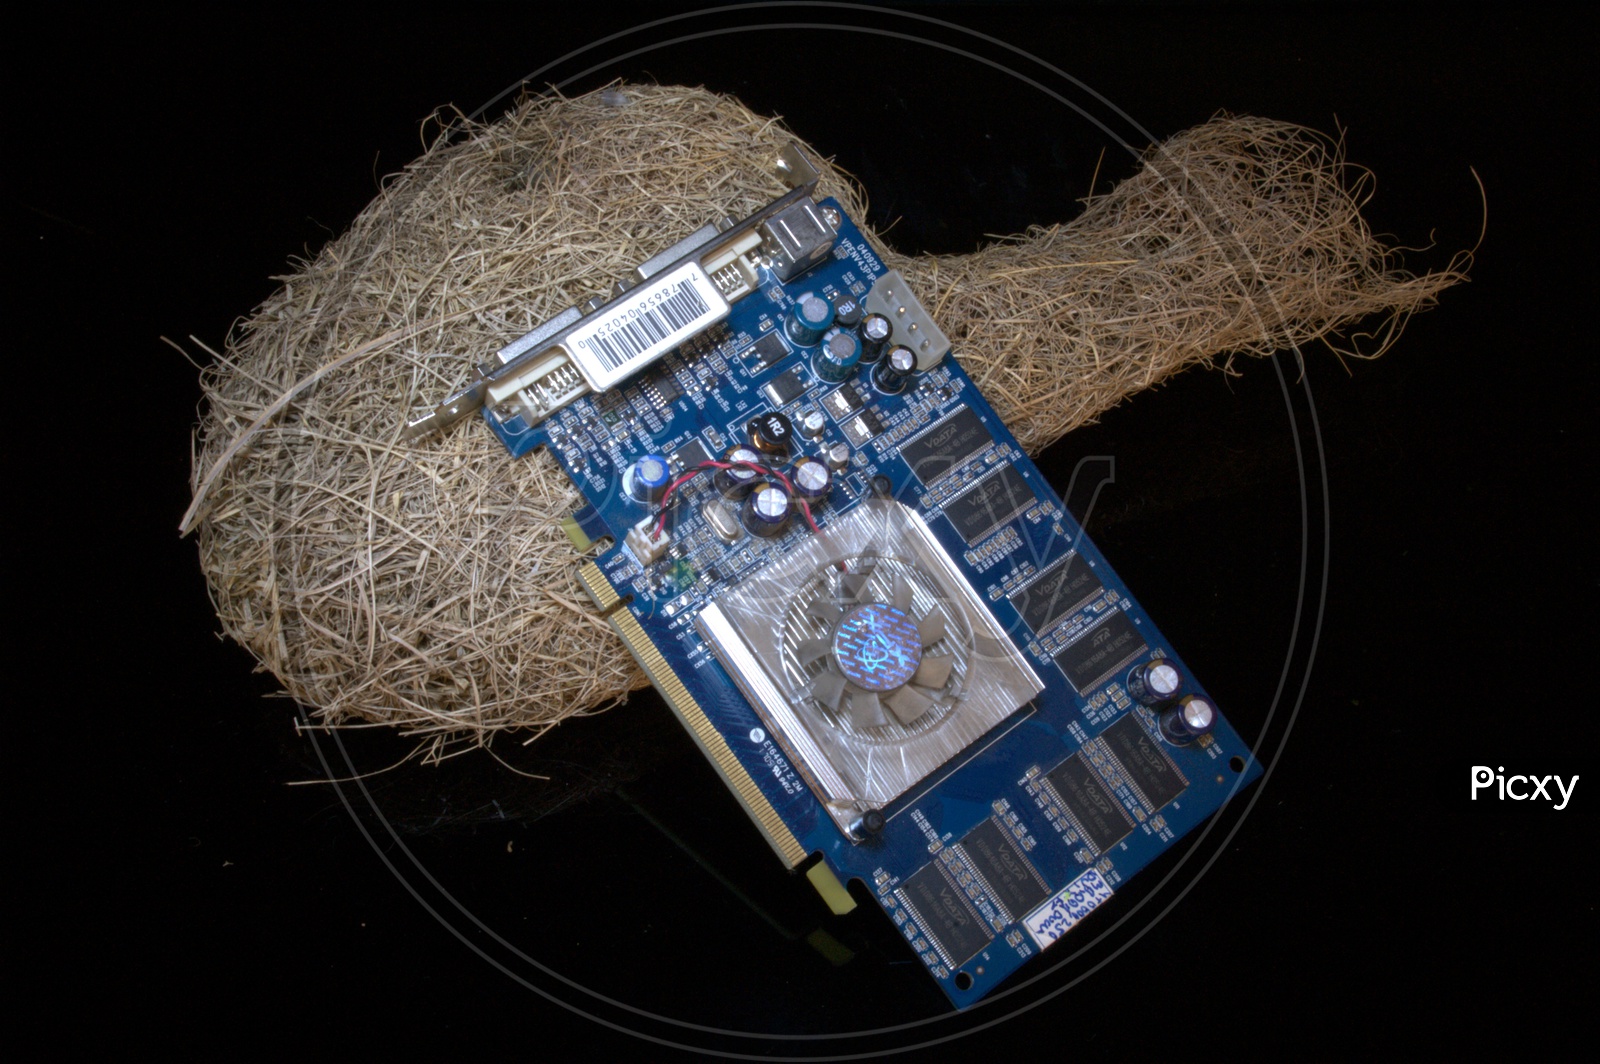 A nest and an electronic circuit board